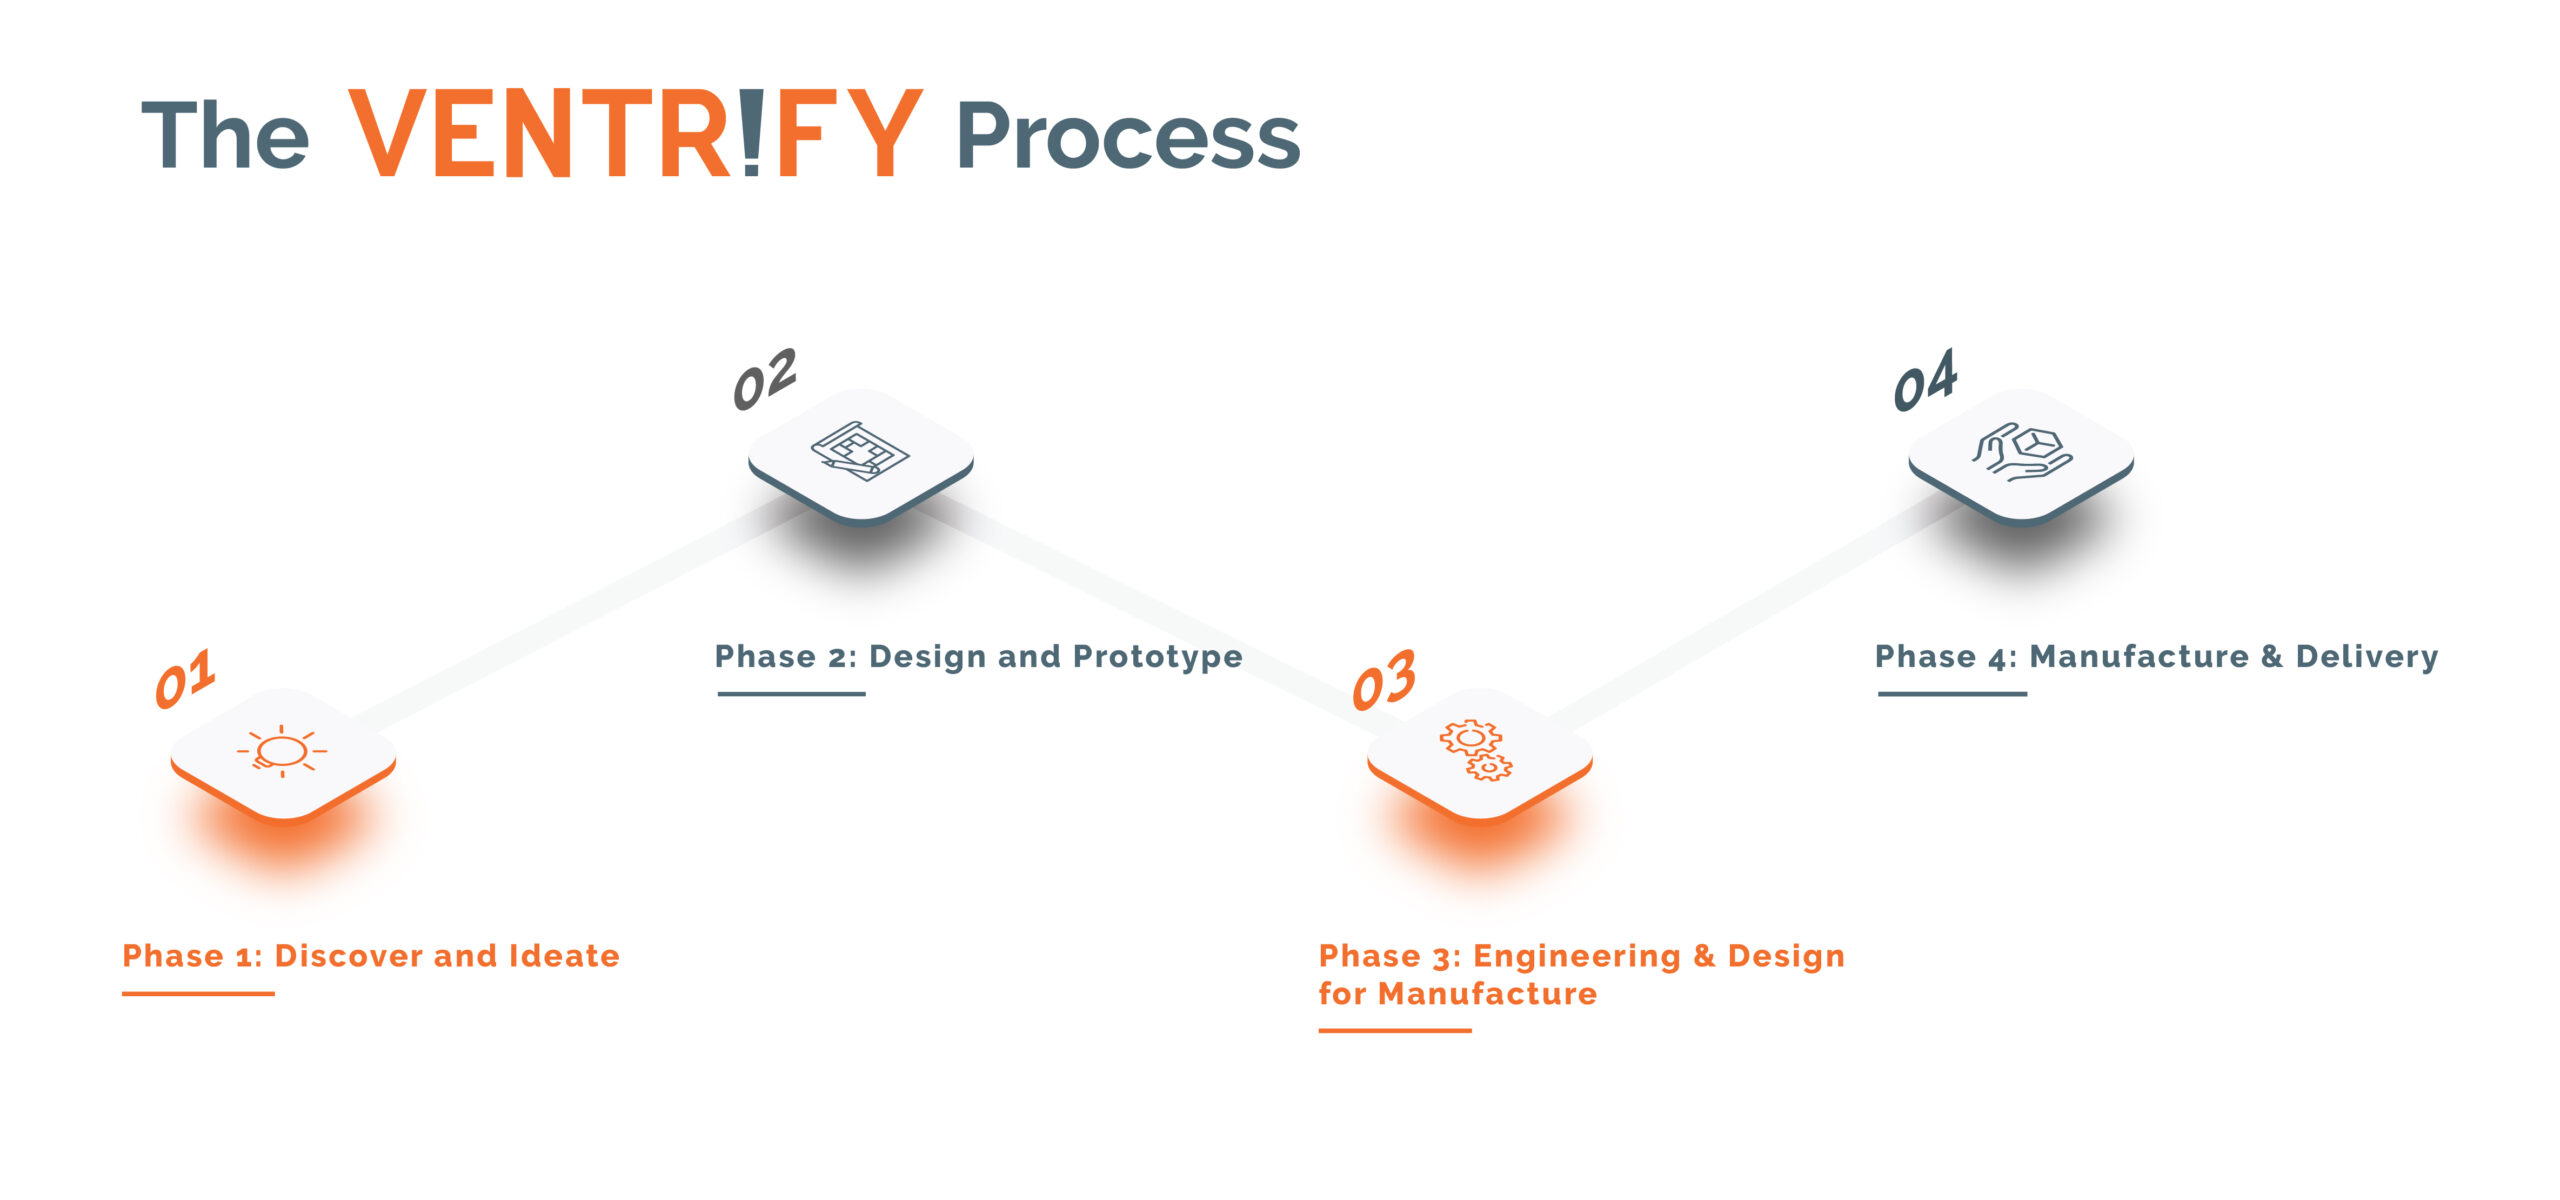 Ventrify Process: Shaping ideas into products